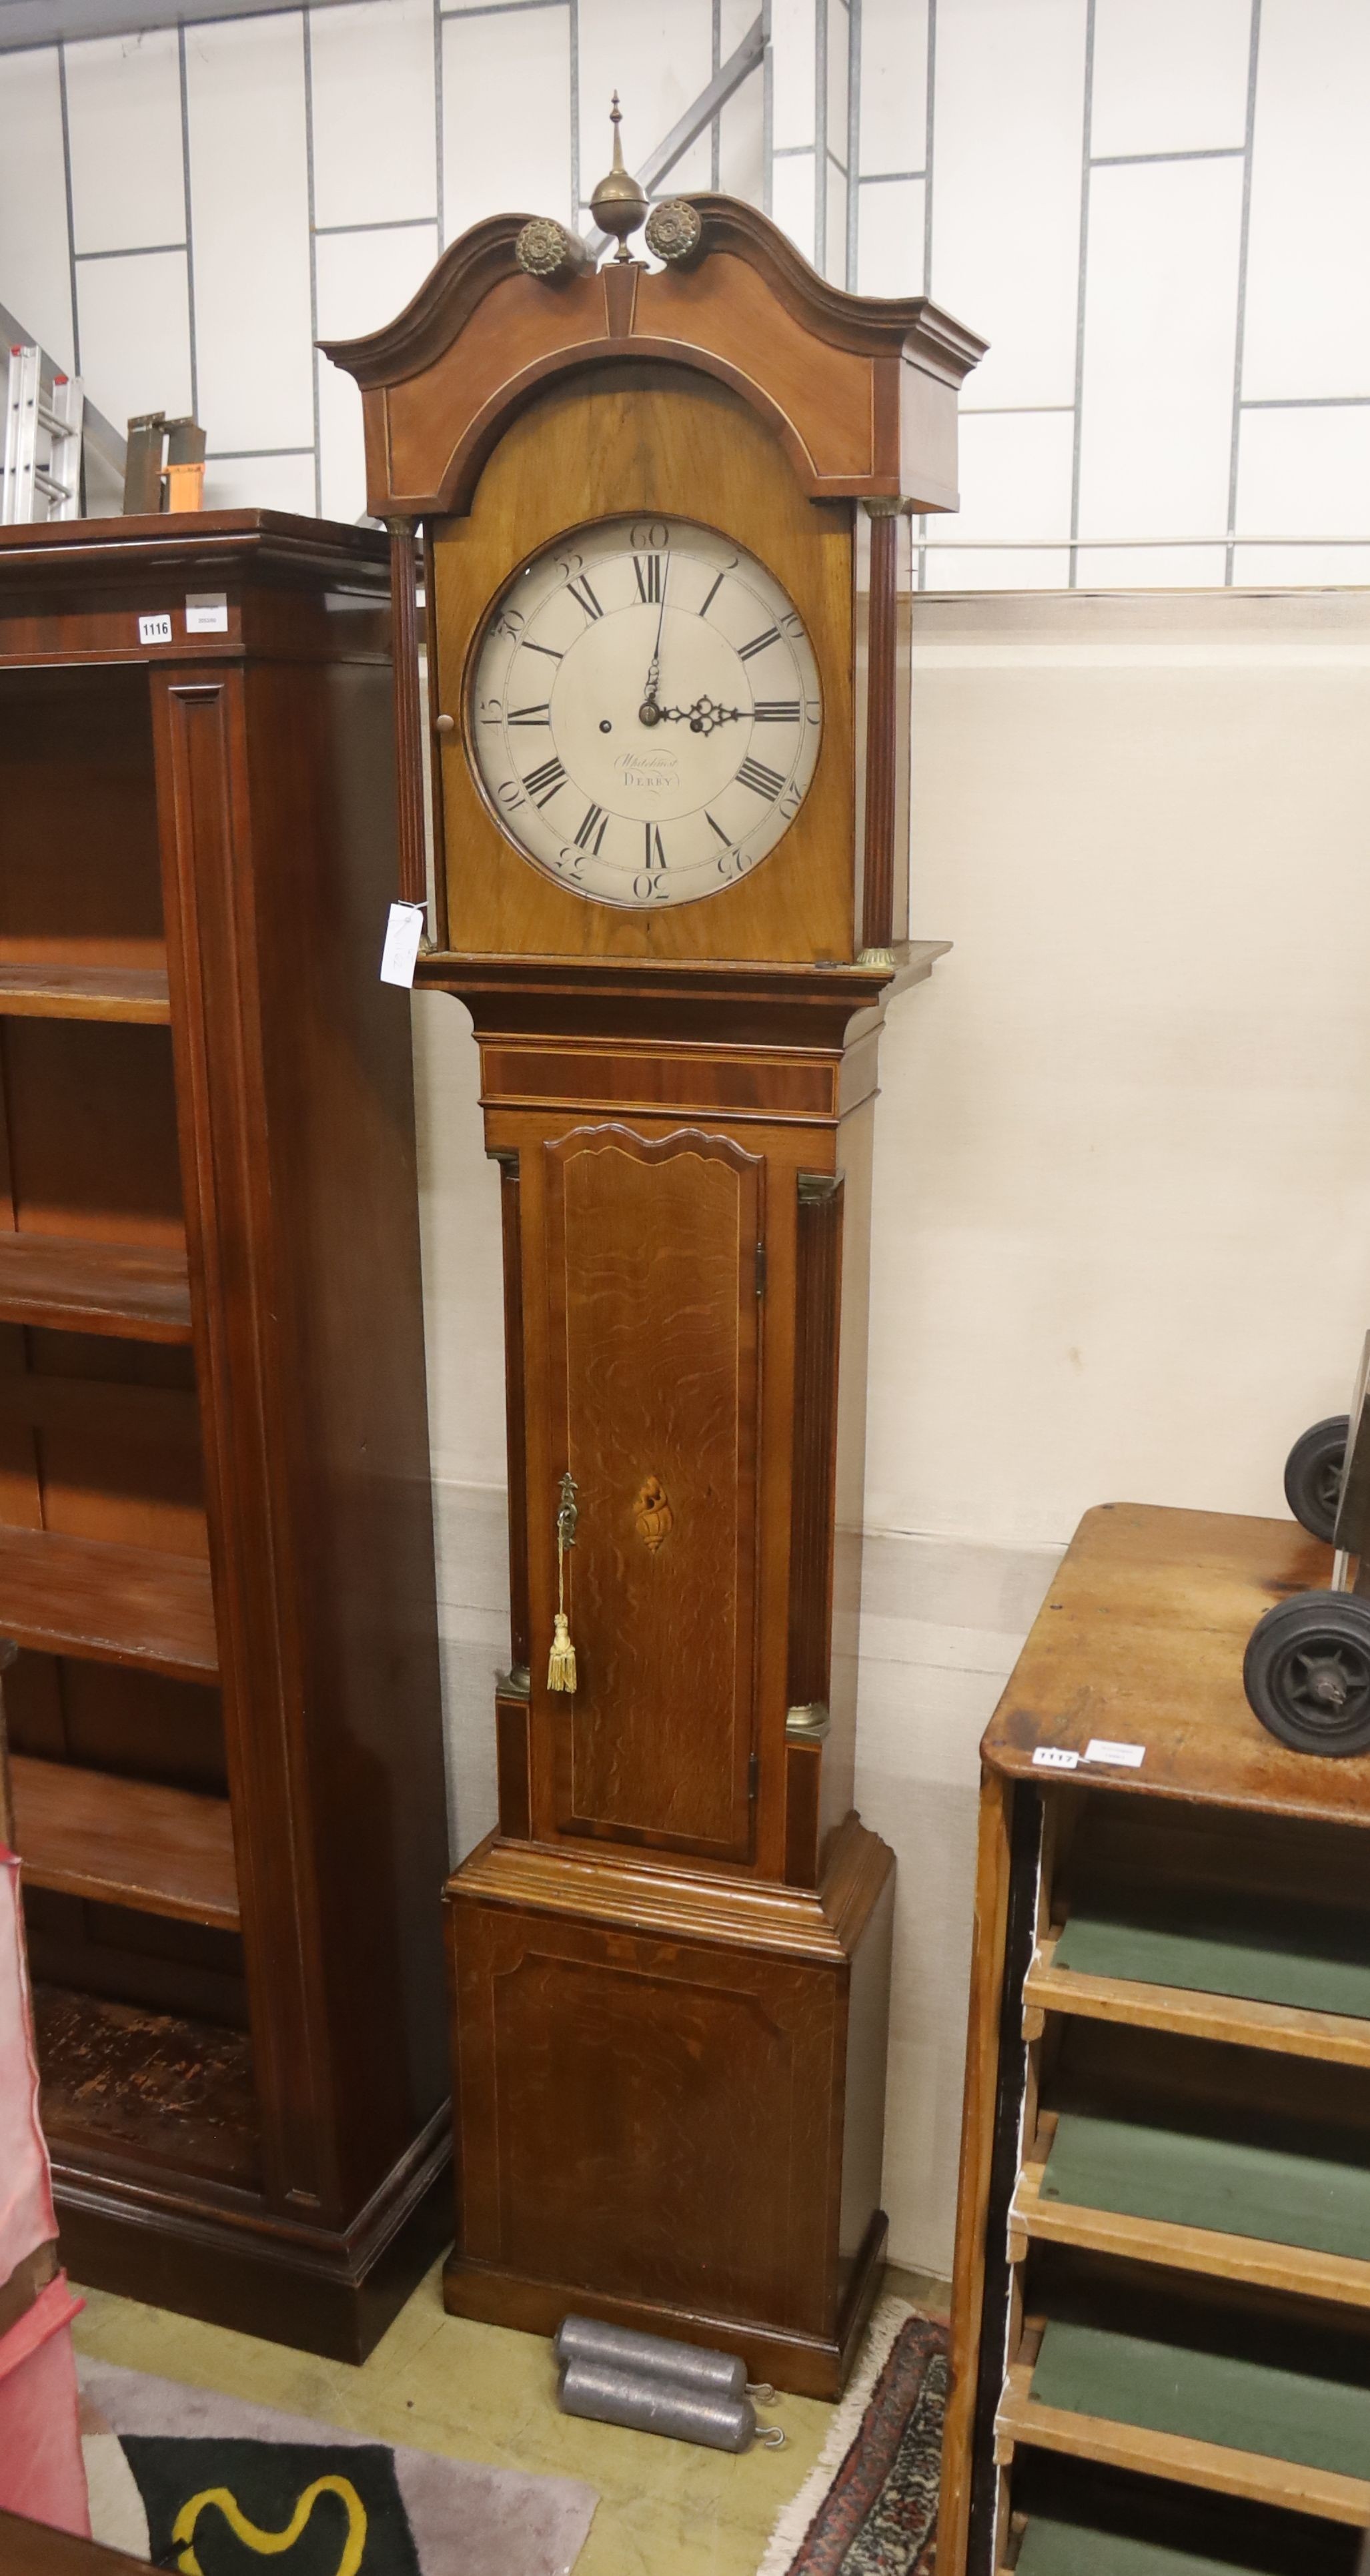 A George III oak and mahogany cased 8 day long case clock, Marked “Whitehurst, Derby”. H-220cm